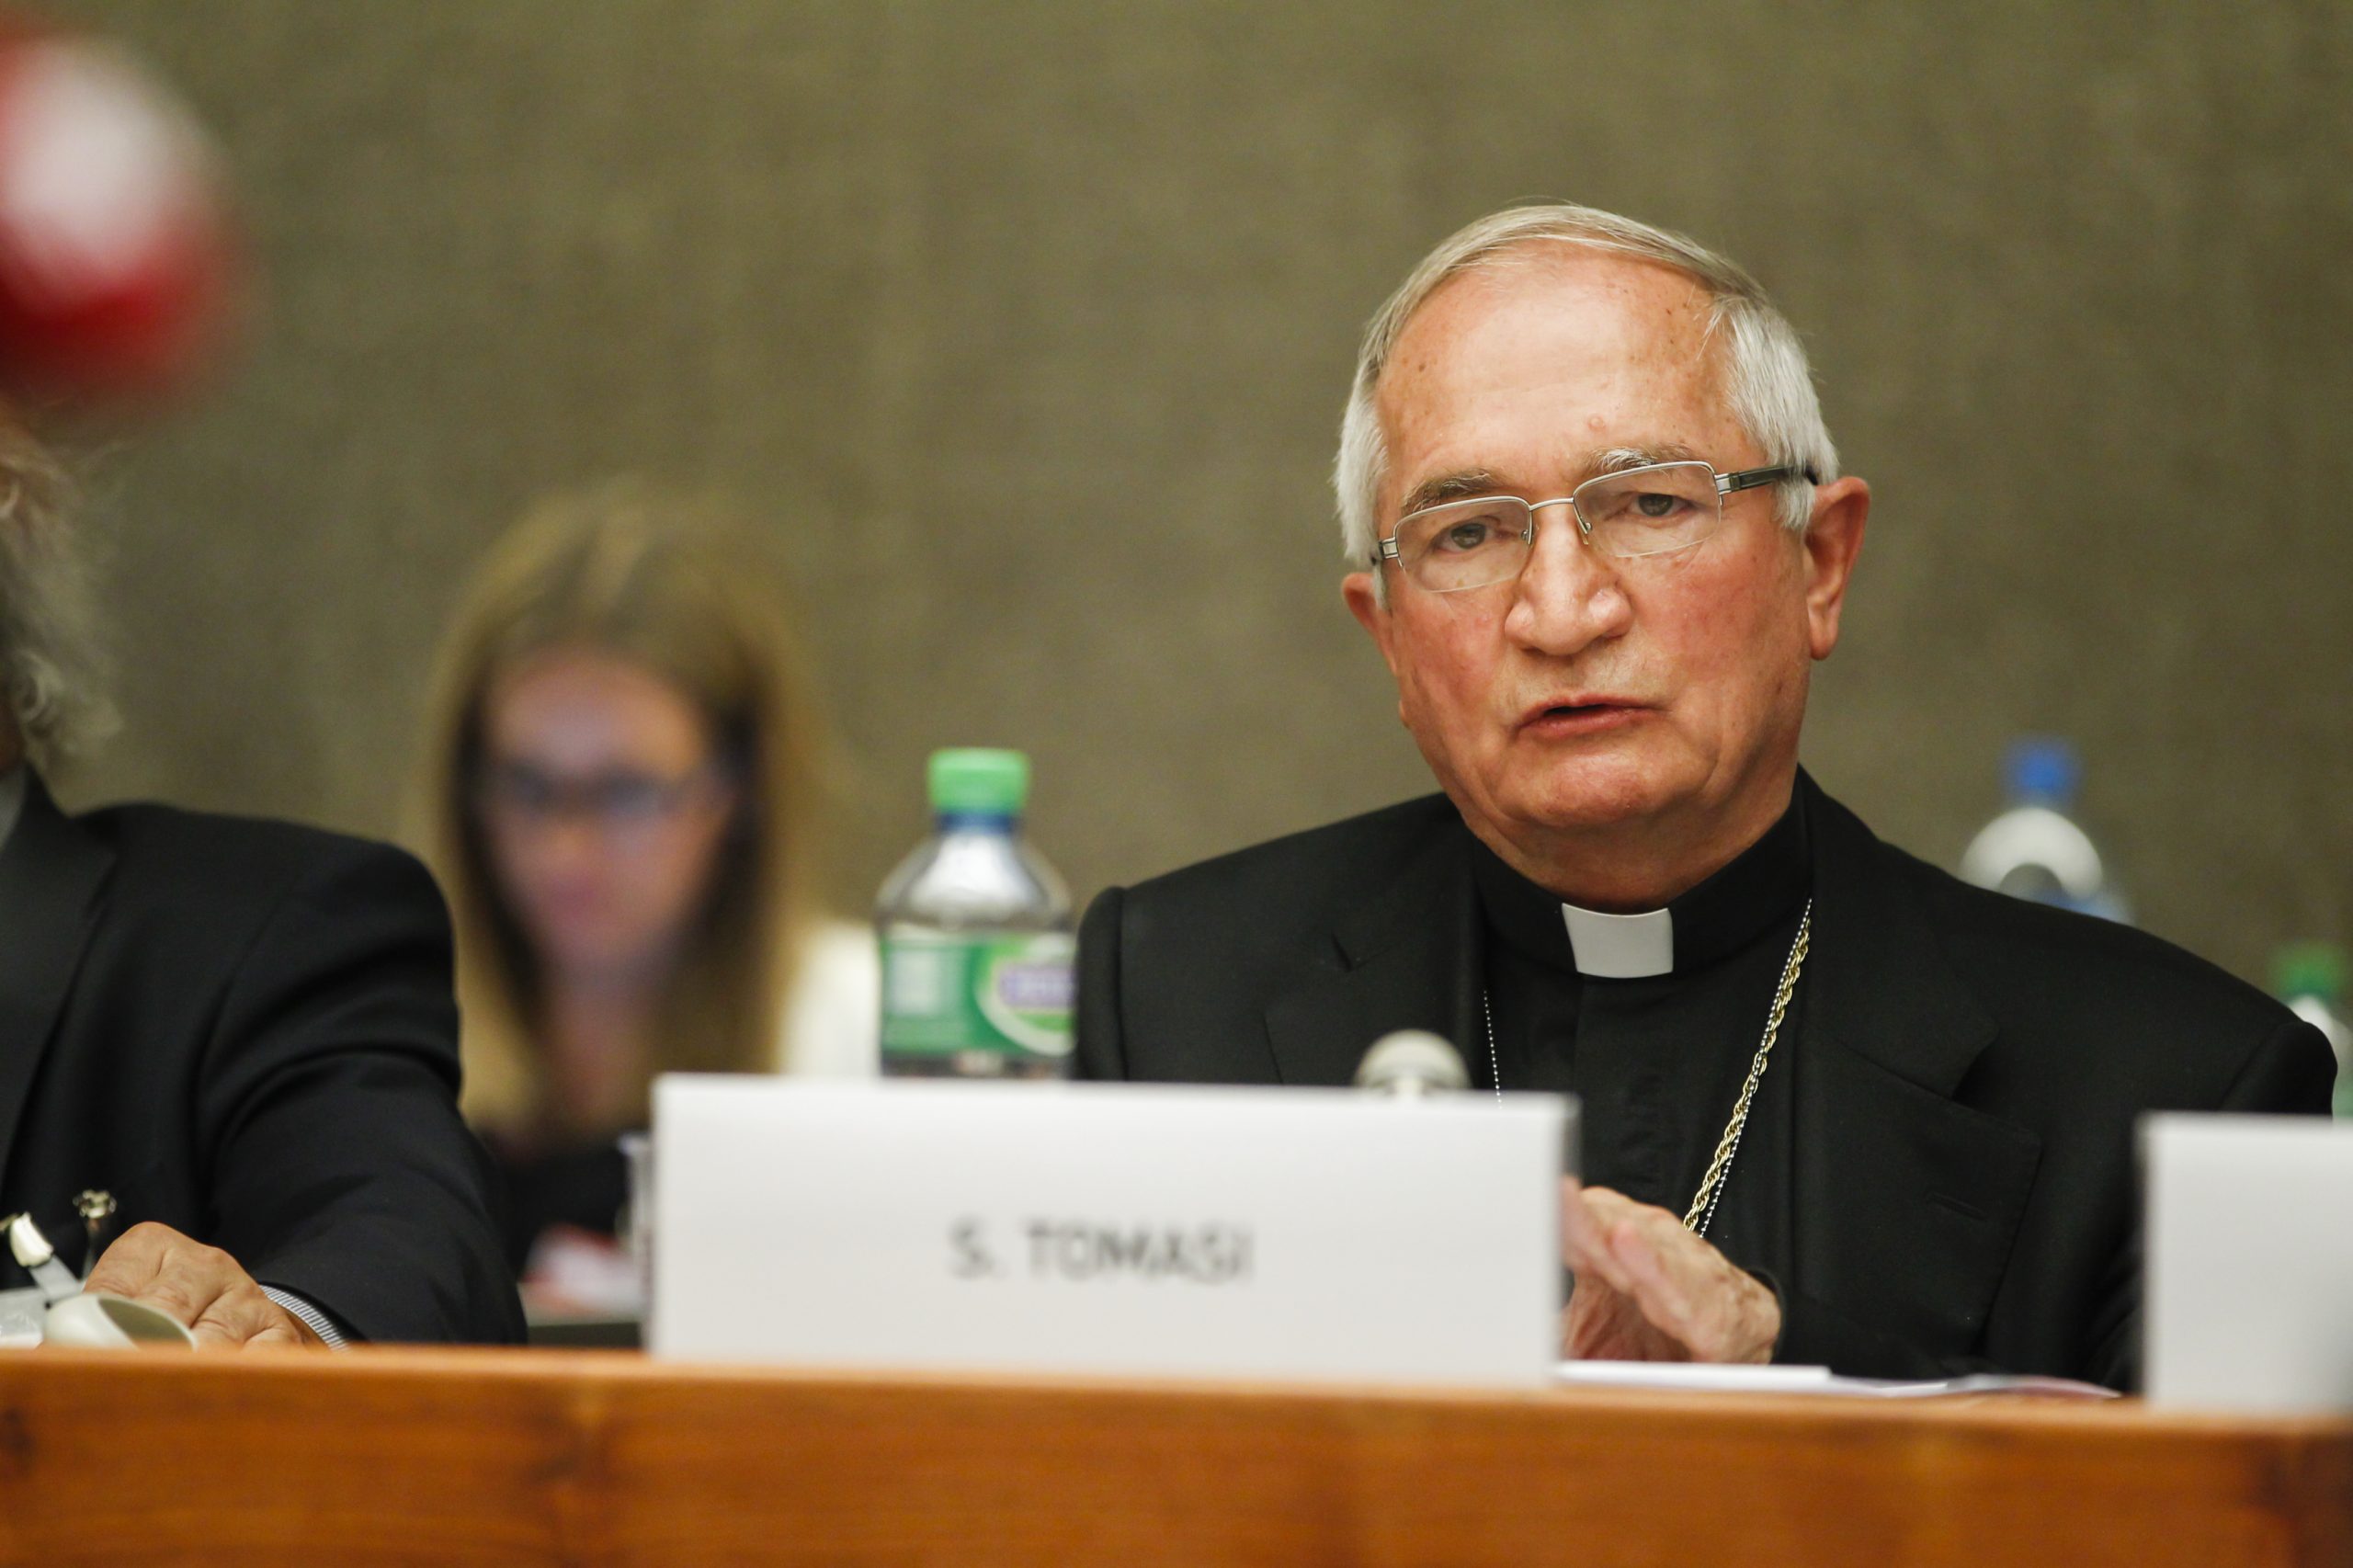 Archbishop Silvano Tomasi is the new Special Delegate to the Sovereign Order of Malta